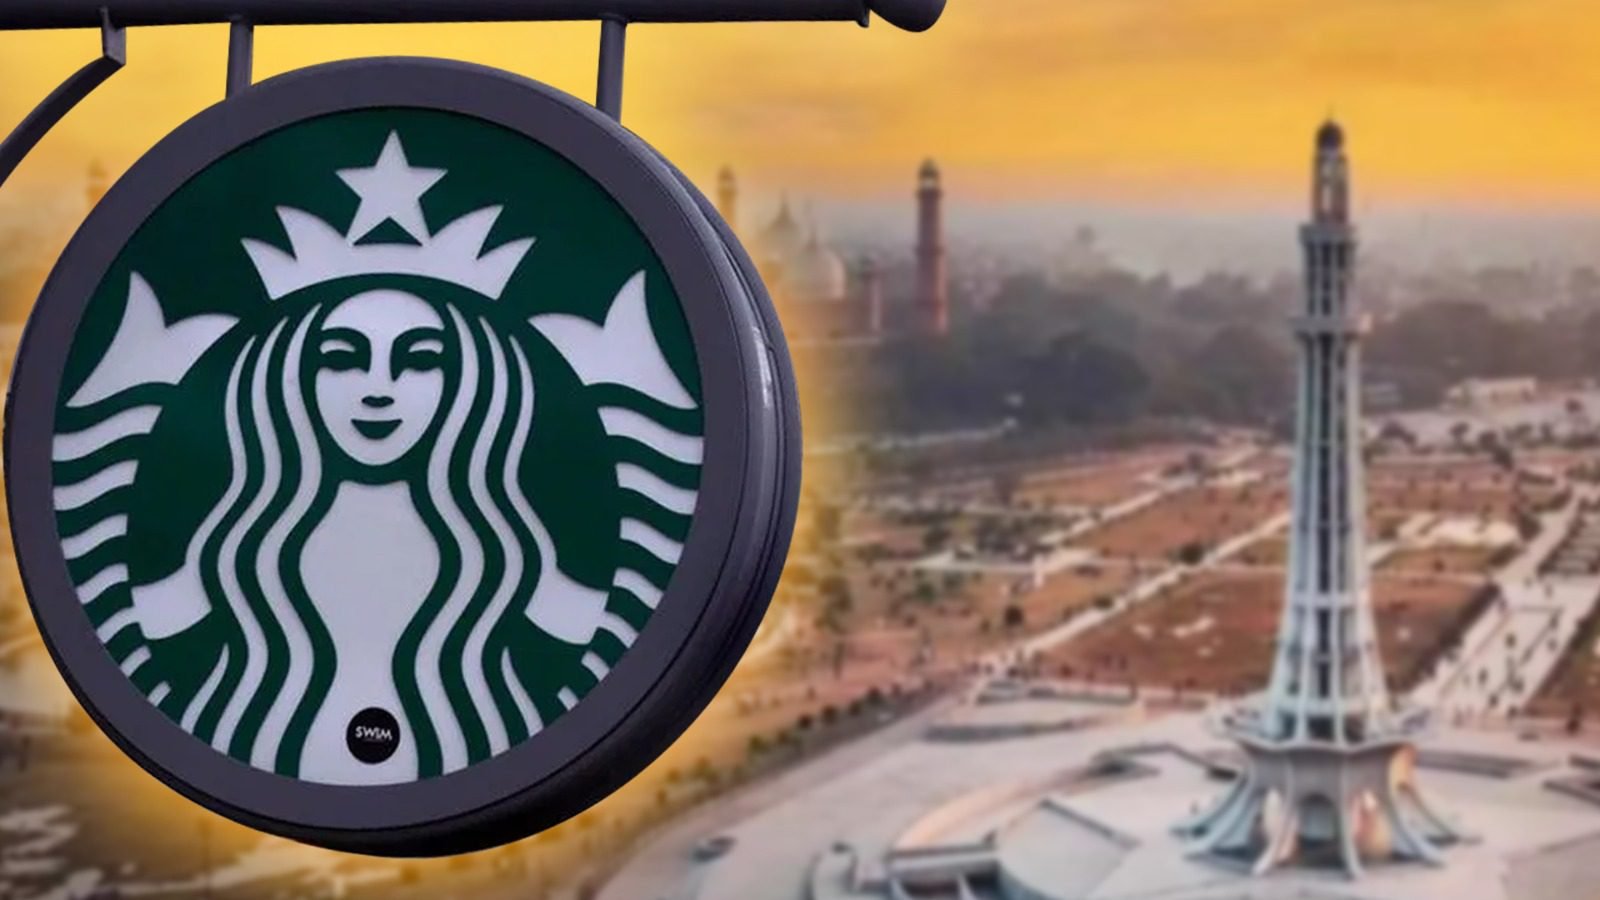 Cafe in Lahore fined Rs6 million for using fake multinational coffee chain ‘Starbucks’ logo